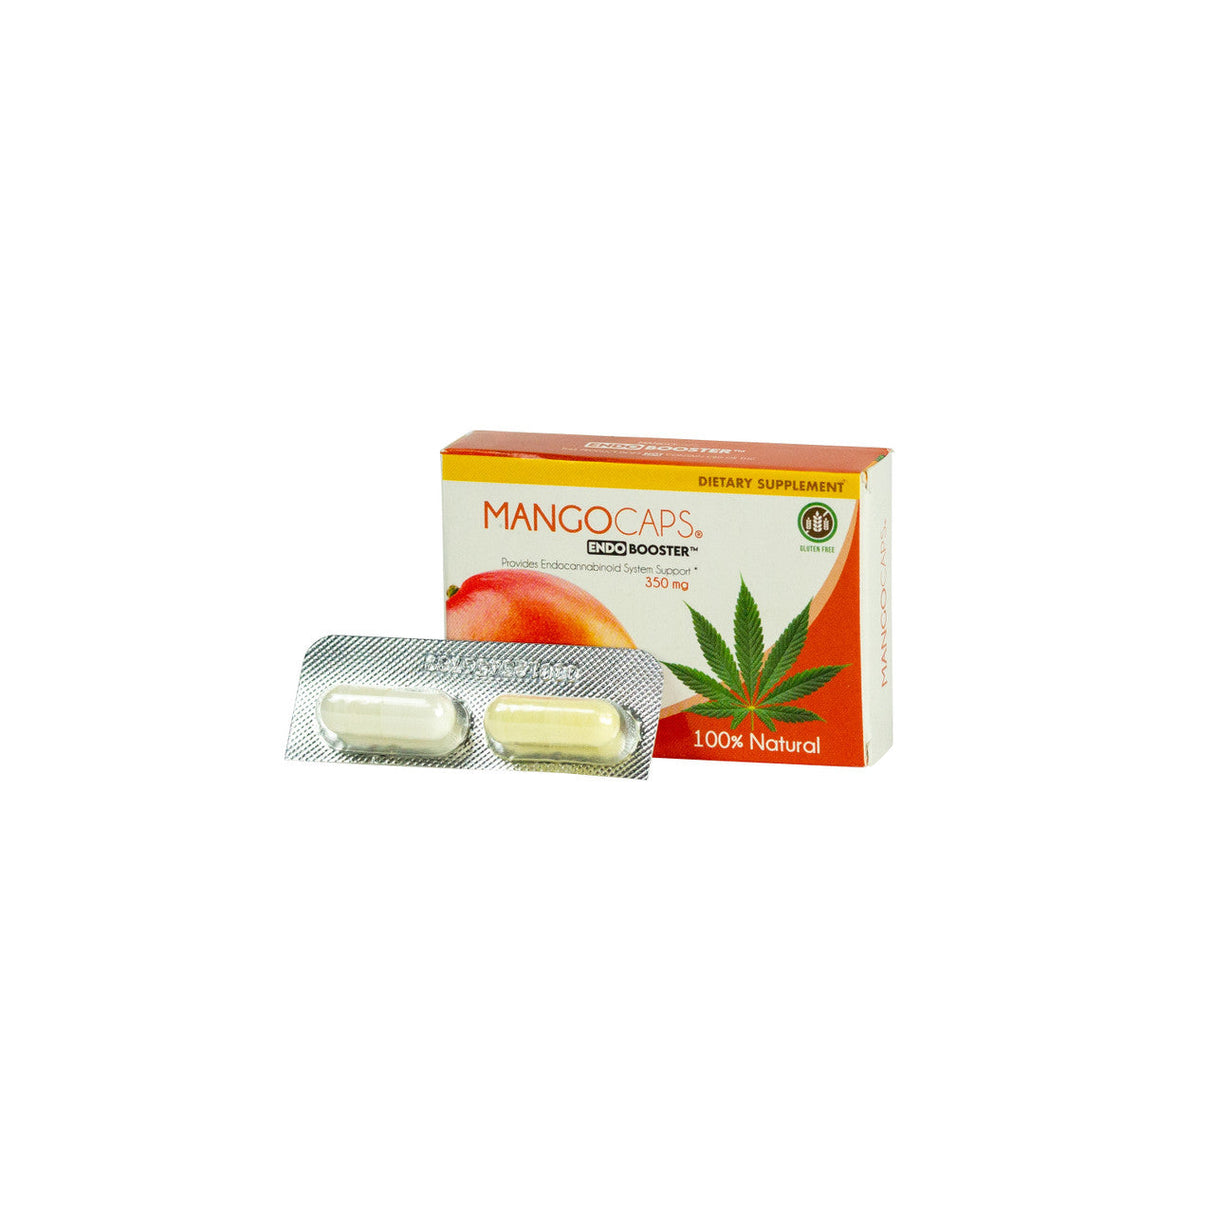 MangoCaps 350mg Endo Booster CBD capsules, 12 pack display with product box and blister pack